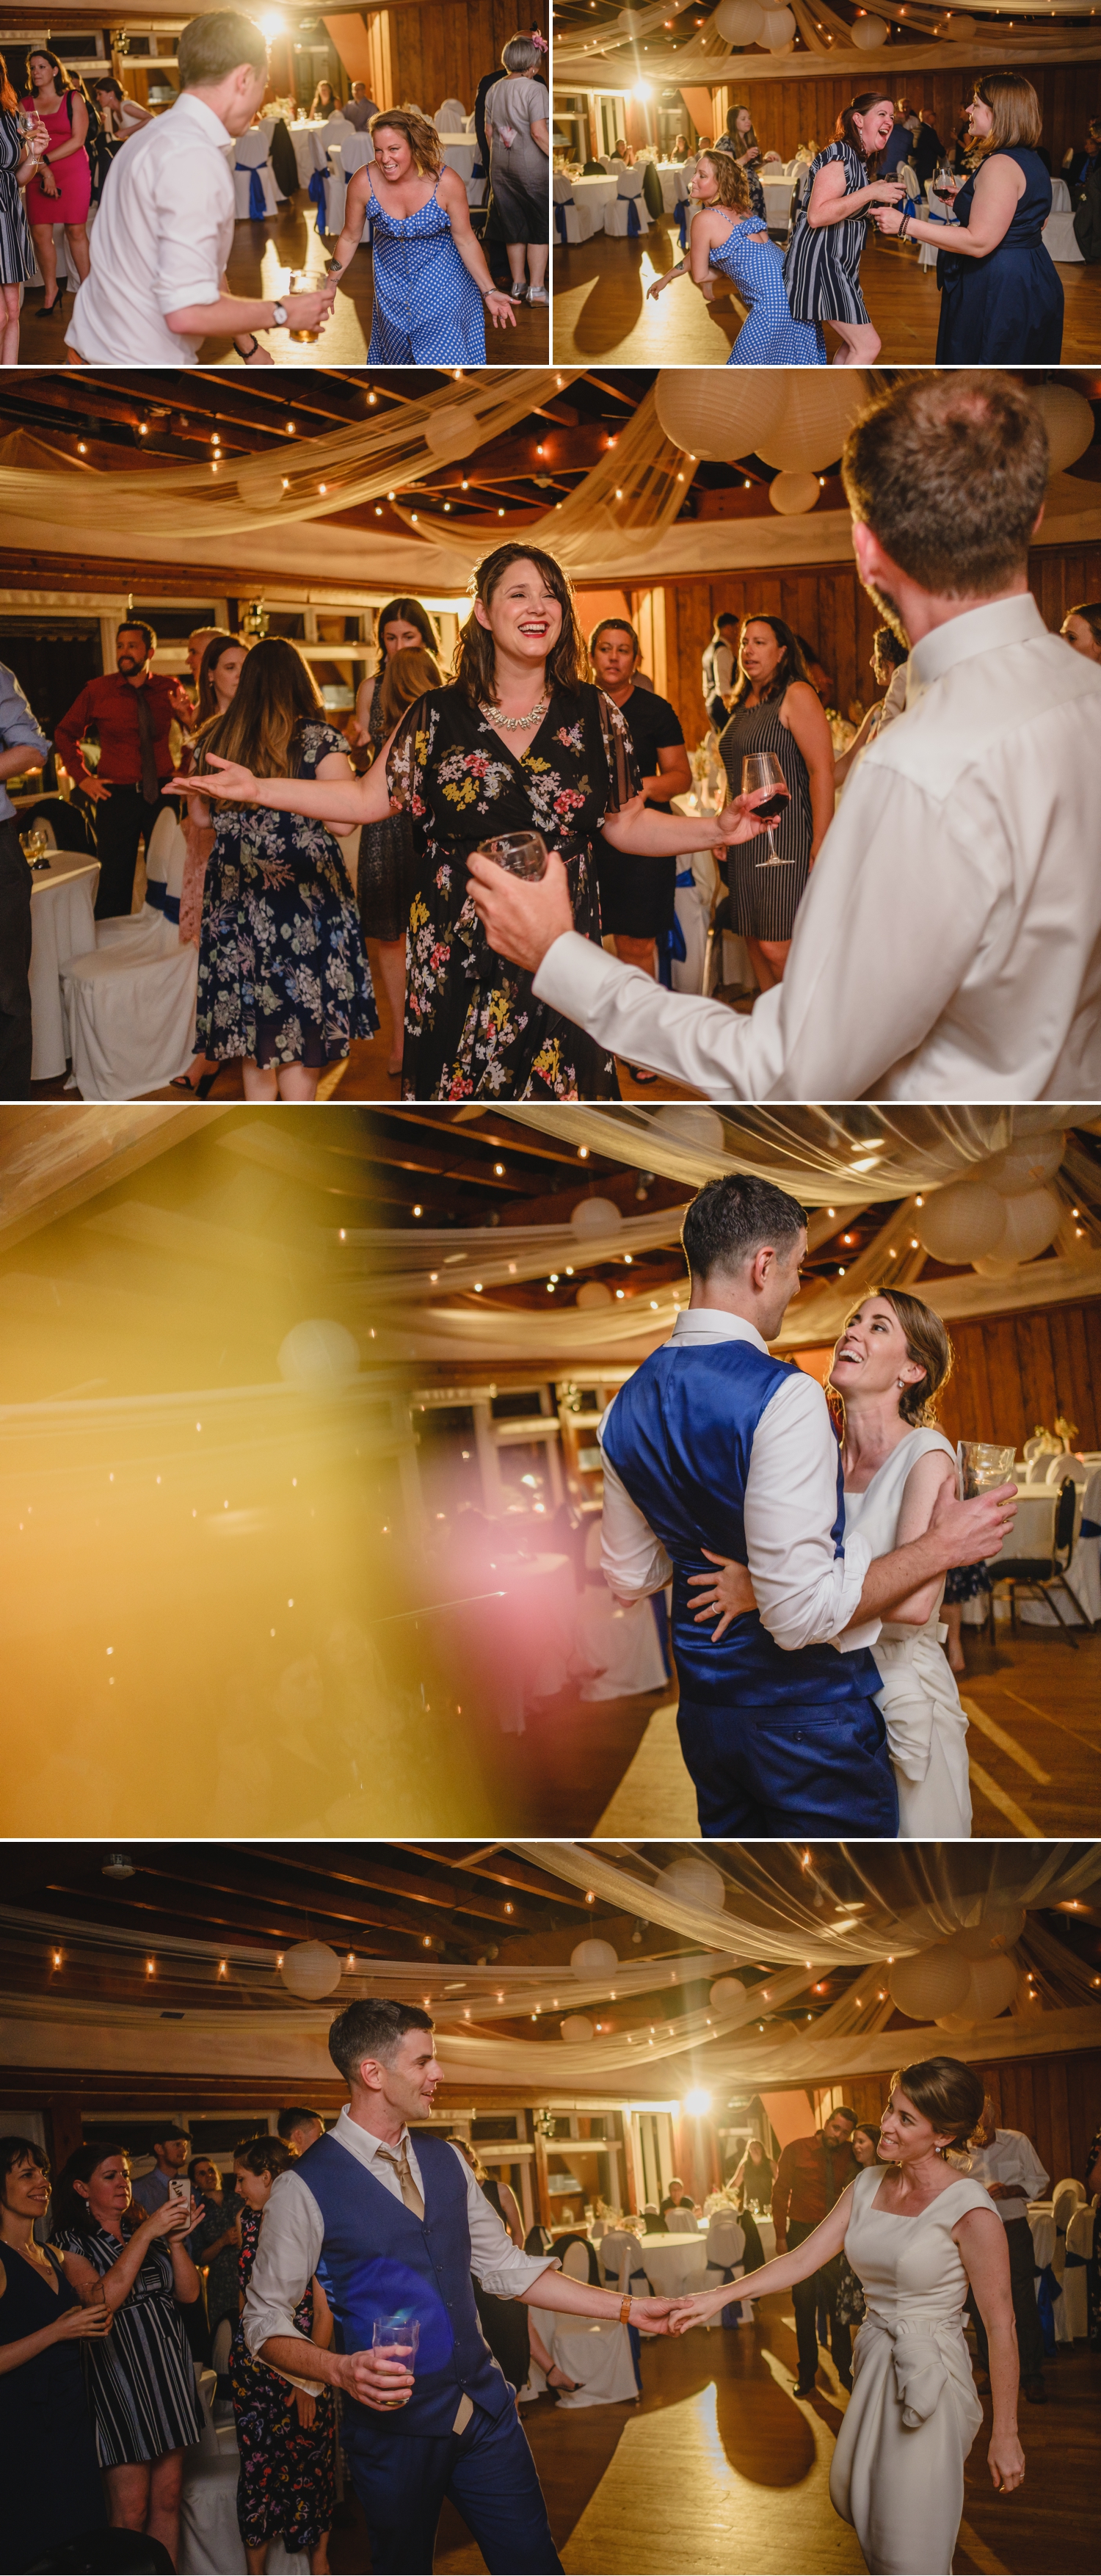 candid dance floor moments during a wedding reception at the britannia yacht club in ottawa ontario